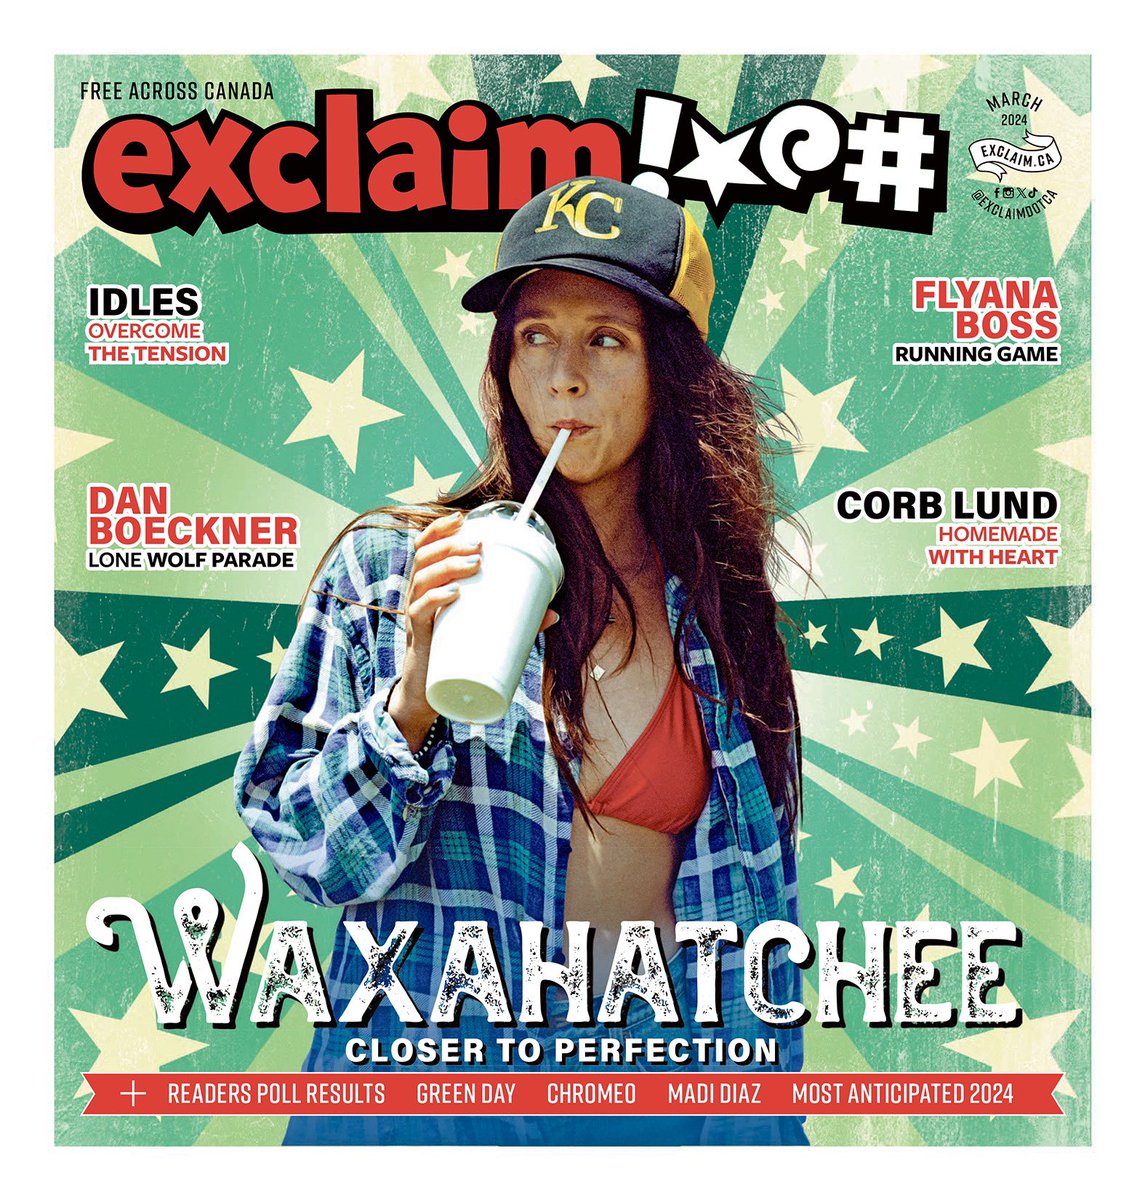 .@k_crutchfield on the cover of @exclaimdotca 🥤❗️ read the full feature: exclaim.ca/music/article/…